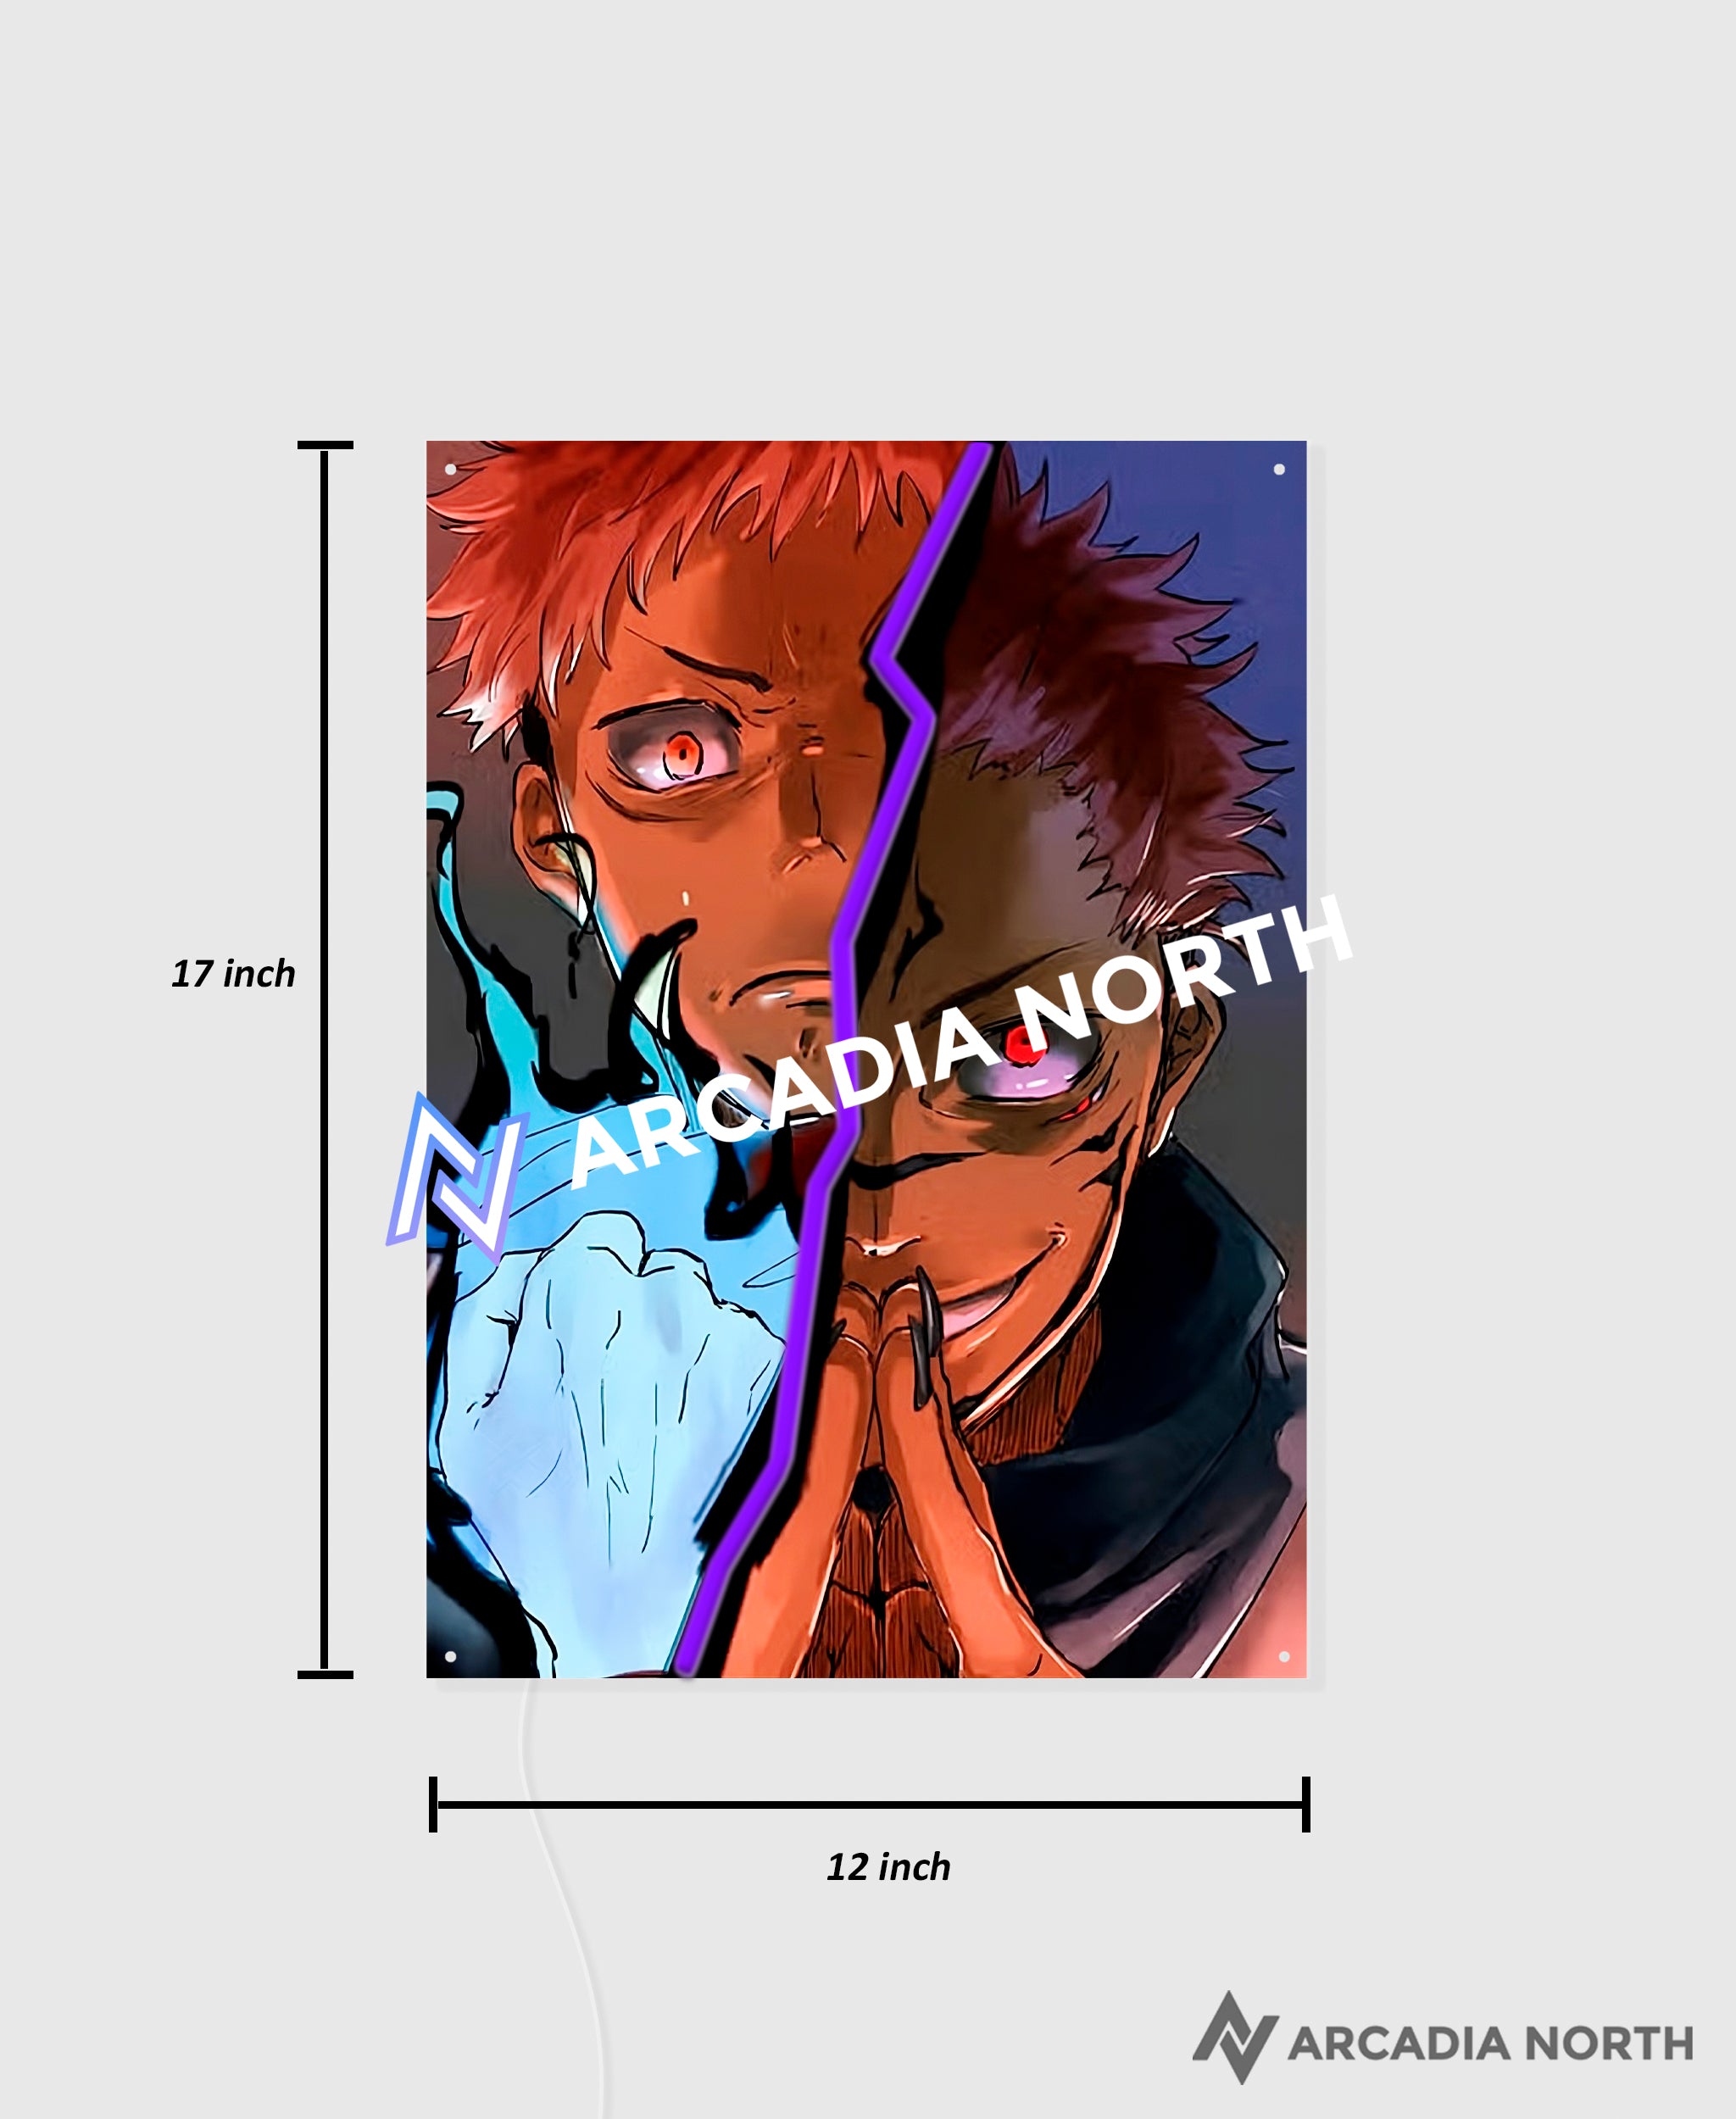 Arcadia North AURALIGHT Original LED Poster featuring the anime Jujutsu Kaisen with Yuji Itadori and Ryomen Sukuna. The split between the two characters is illuminated by LED neon lights. UV-printed poster on acrylic.